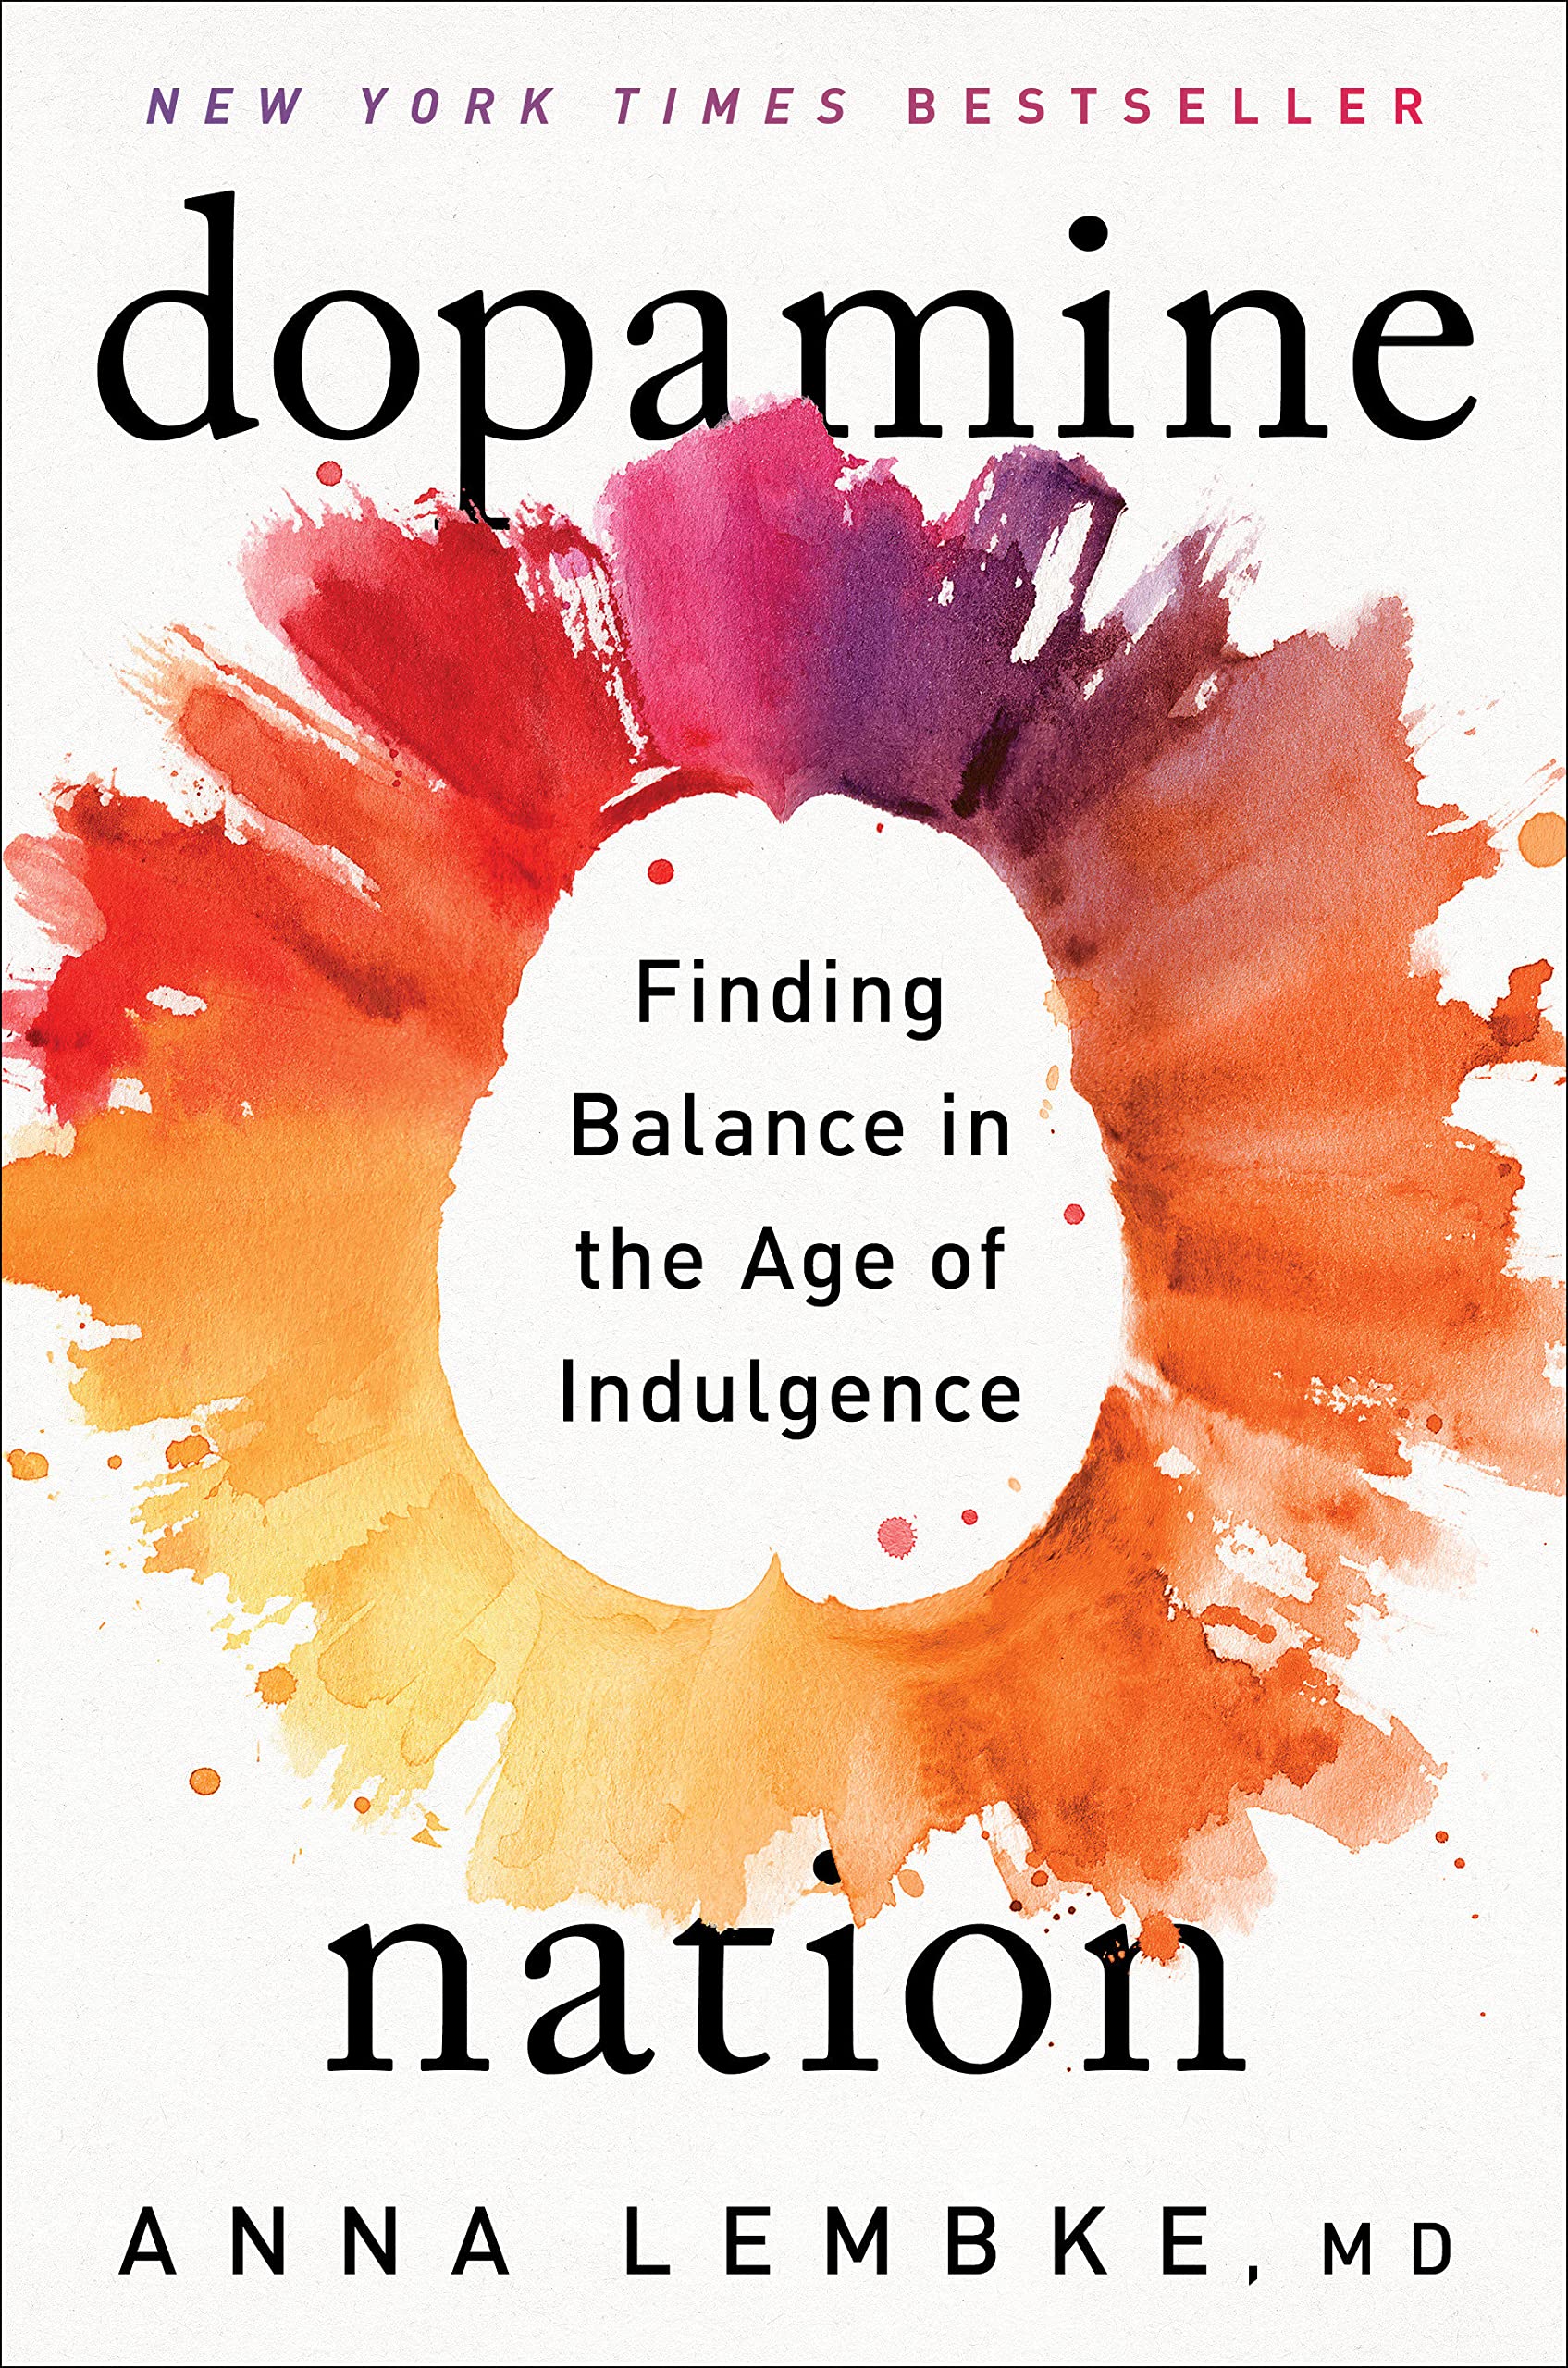 Dopamine Nation: Finding Balance in the Age of Indulgence (2021, Dutton)